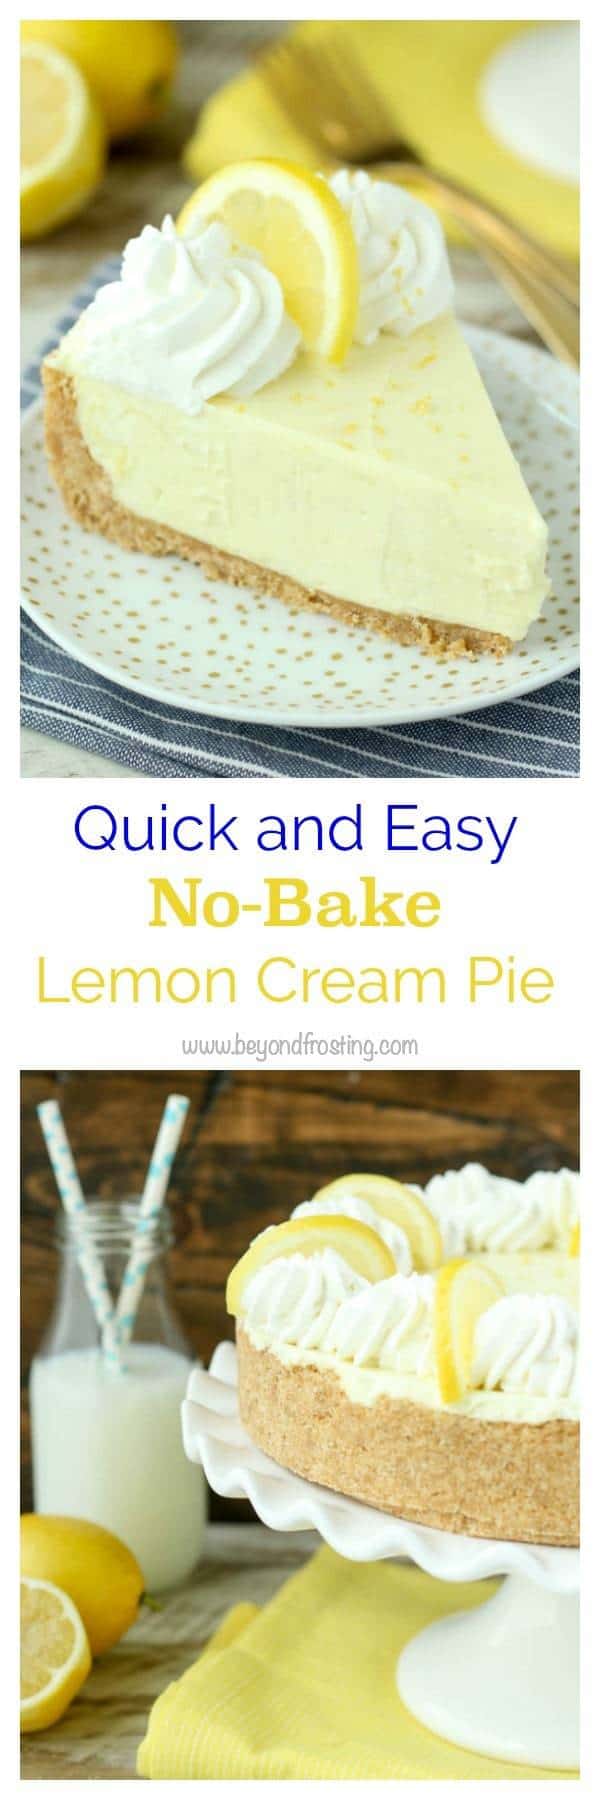 Quick and Easy No-Bake Lemon Cream Pie - Beyond Frosting